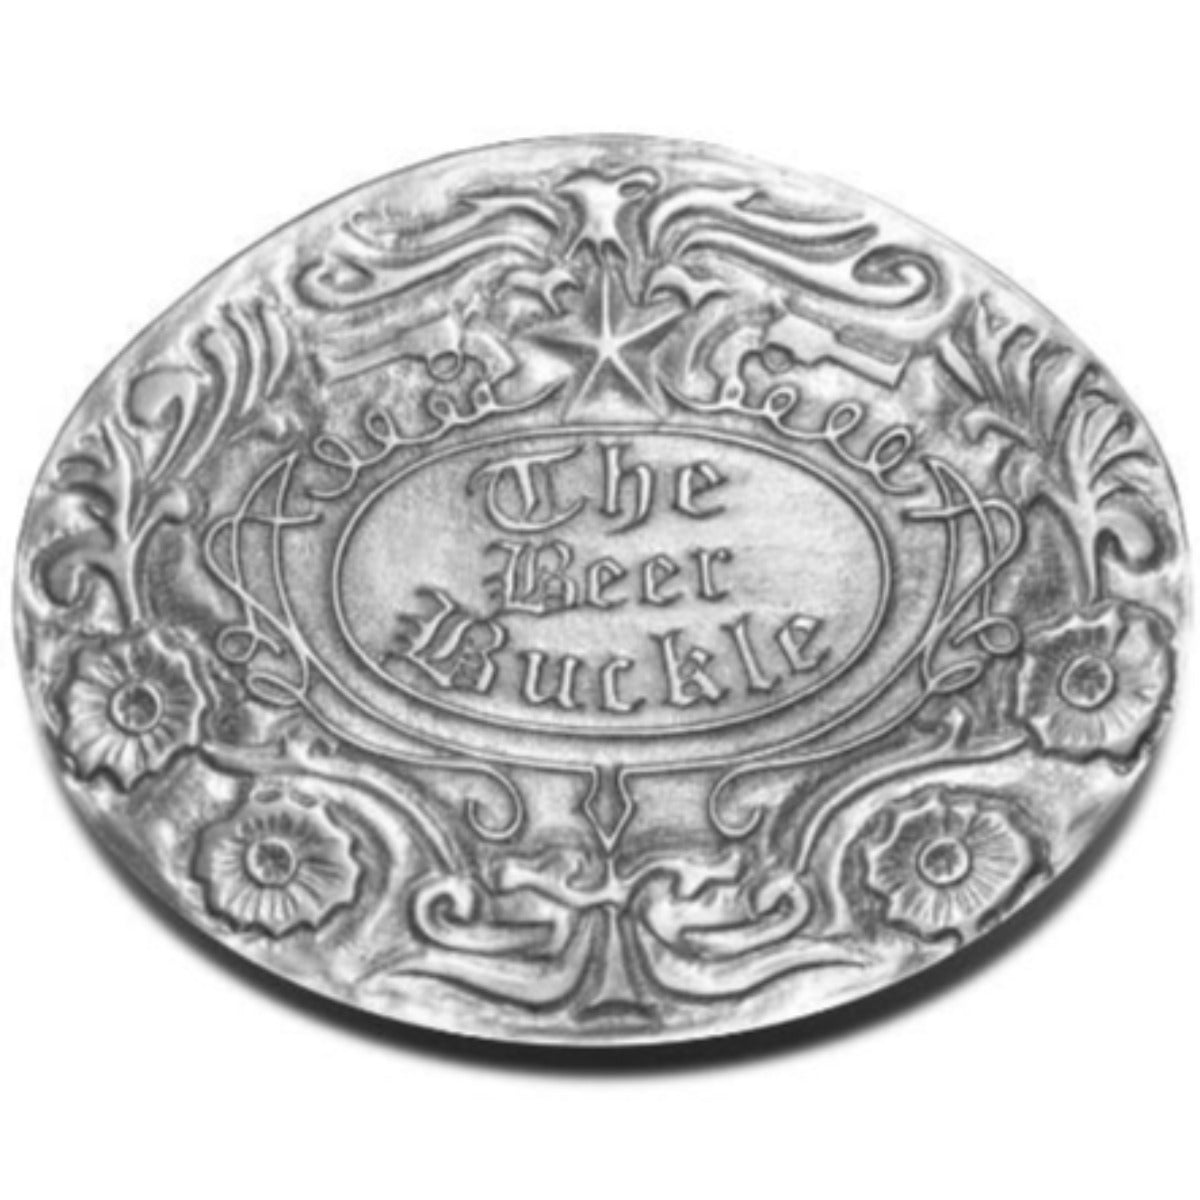 A USA-inspired silver buckle with an ornate design, exuding American pride, The Original Belt Buckle Cup Holder.